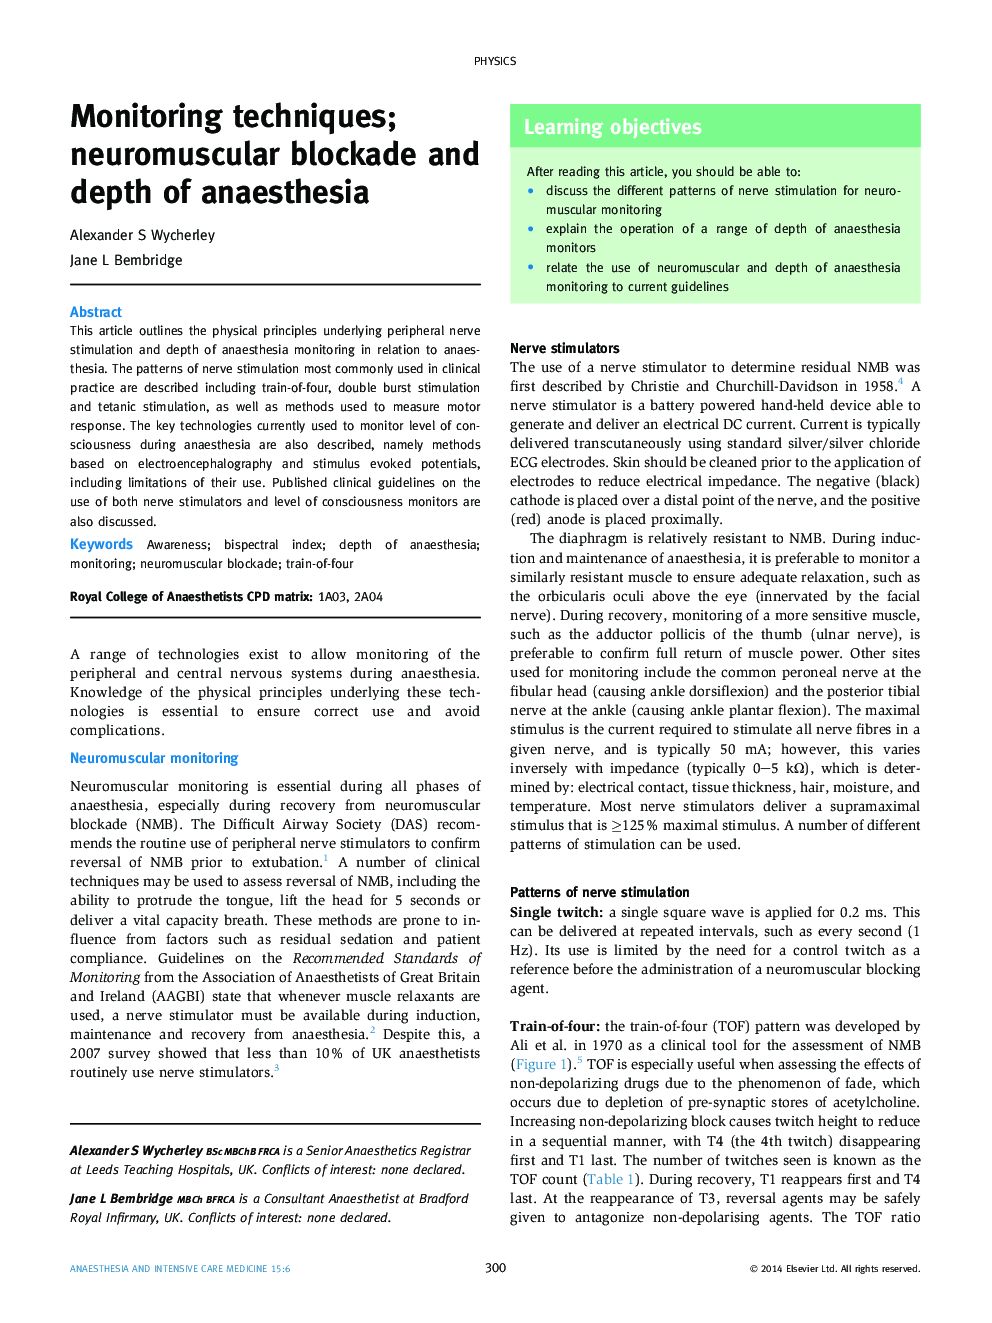 Monitoring techniques; neuromuscular blockade and depth of anaesthesia